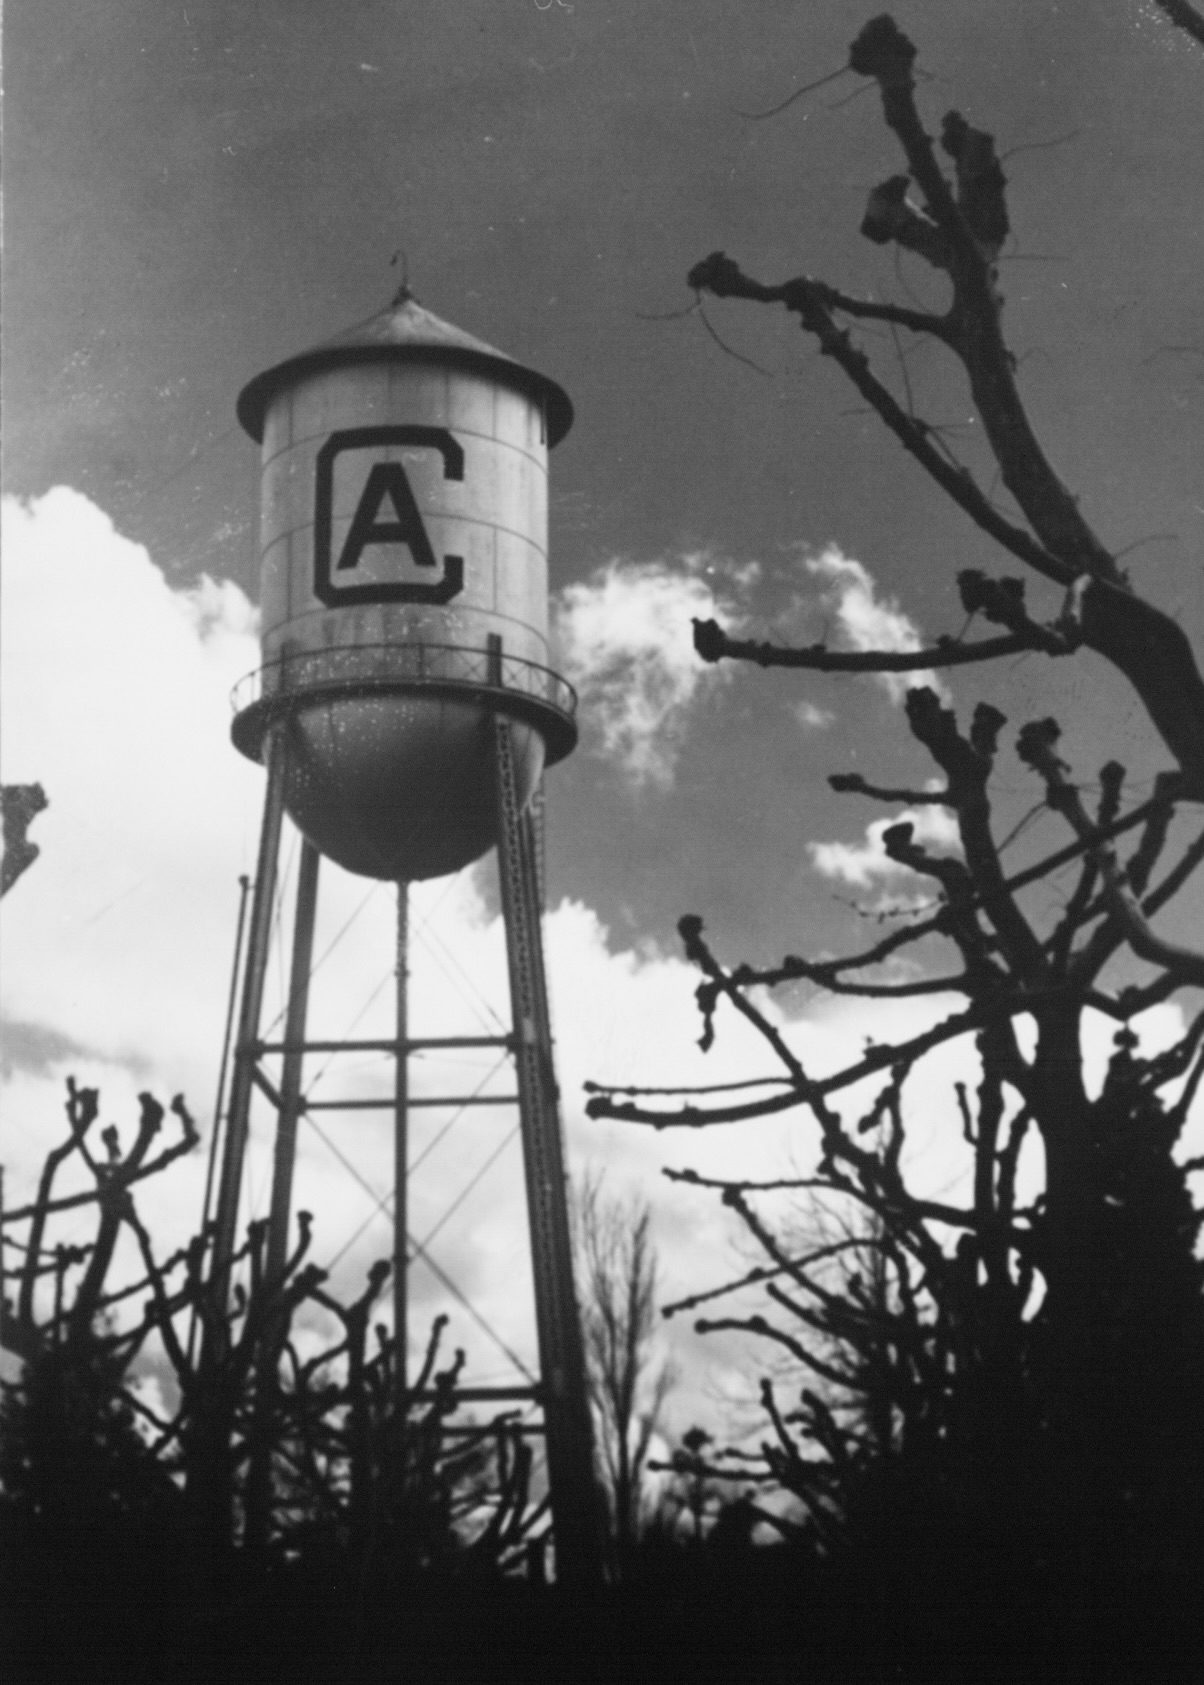 Steel water tower with CA symbol